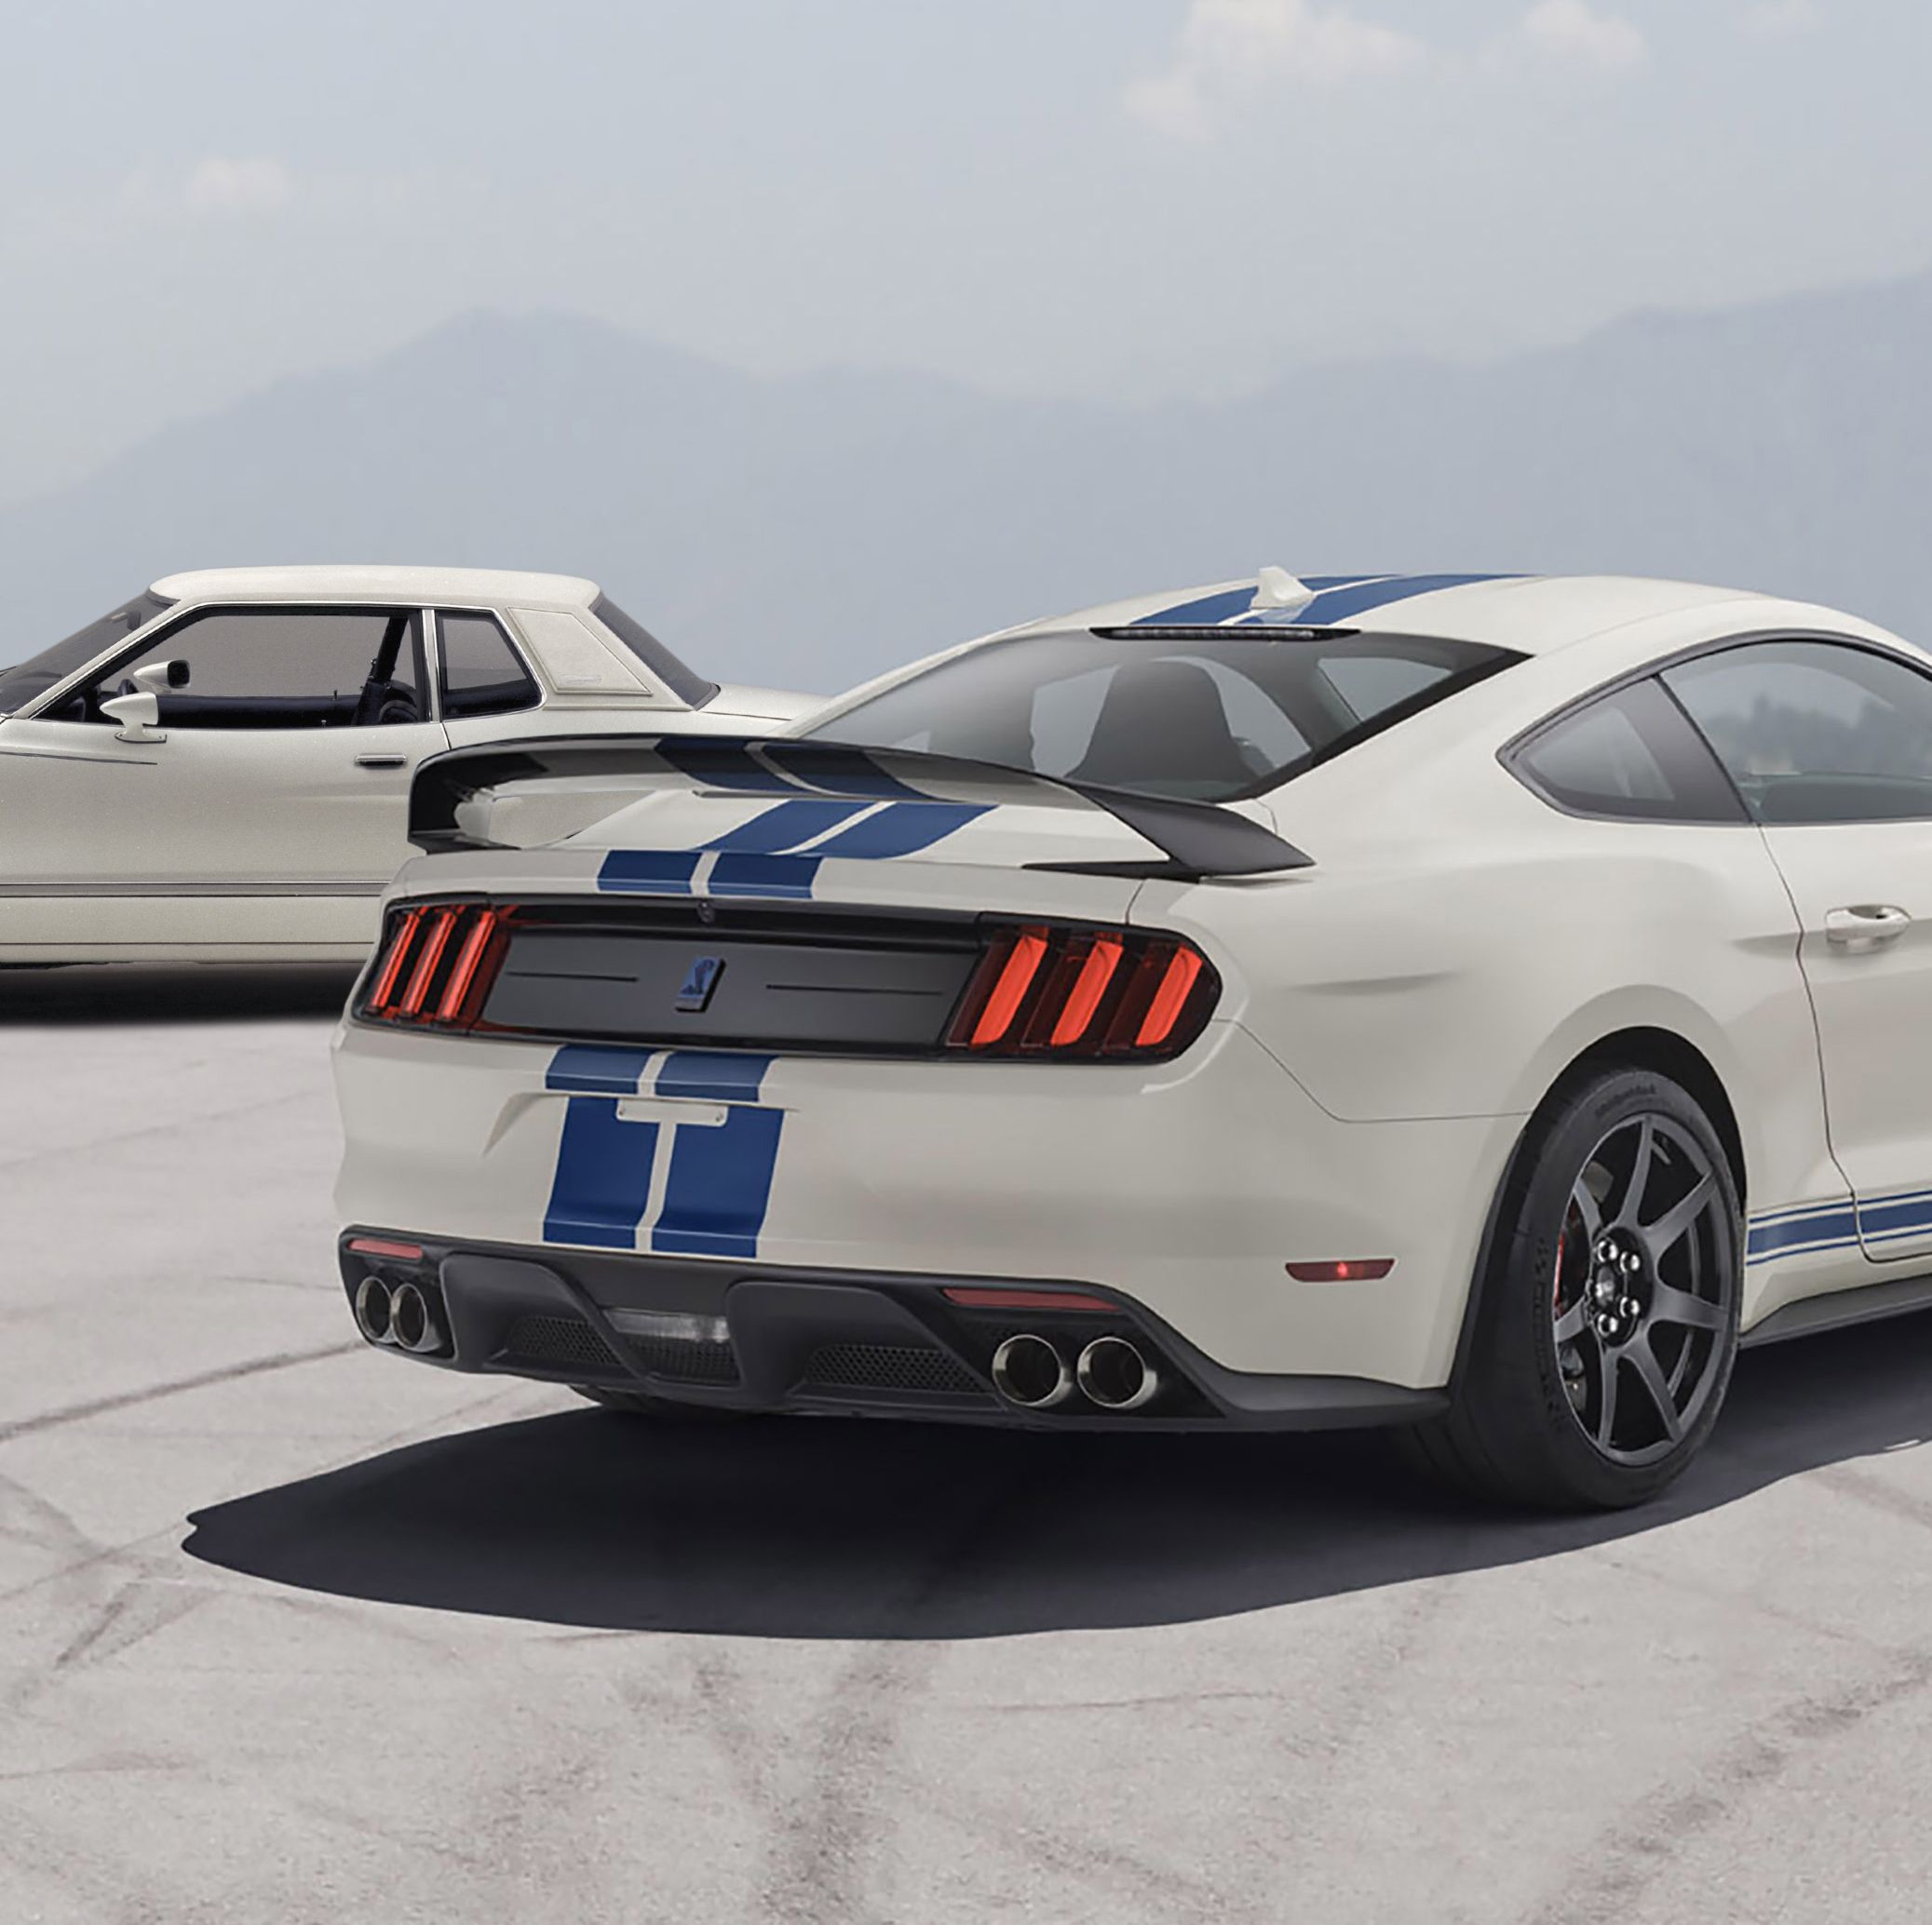 Revving Up: Best and Worst Ford Mustang Years